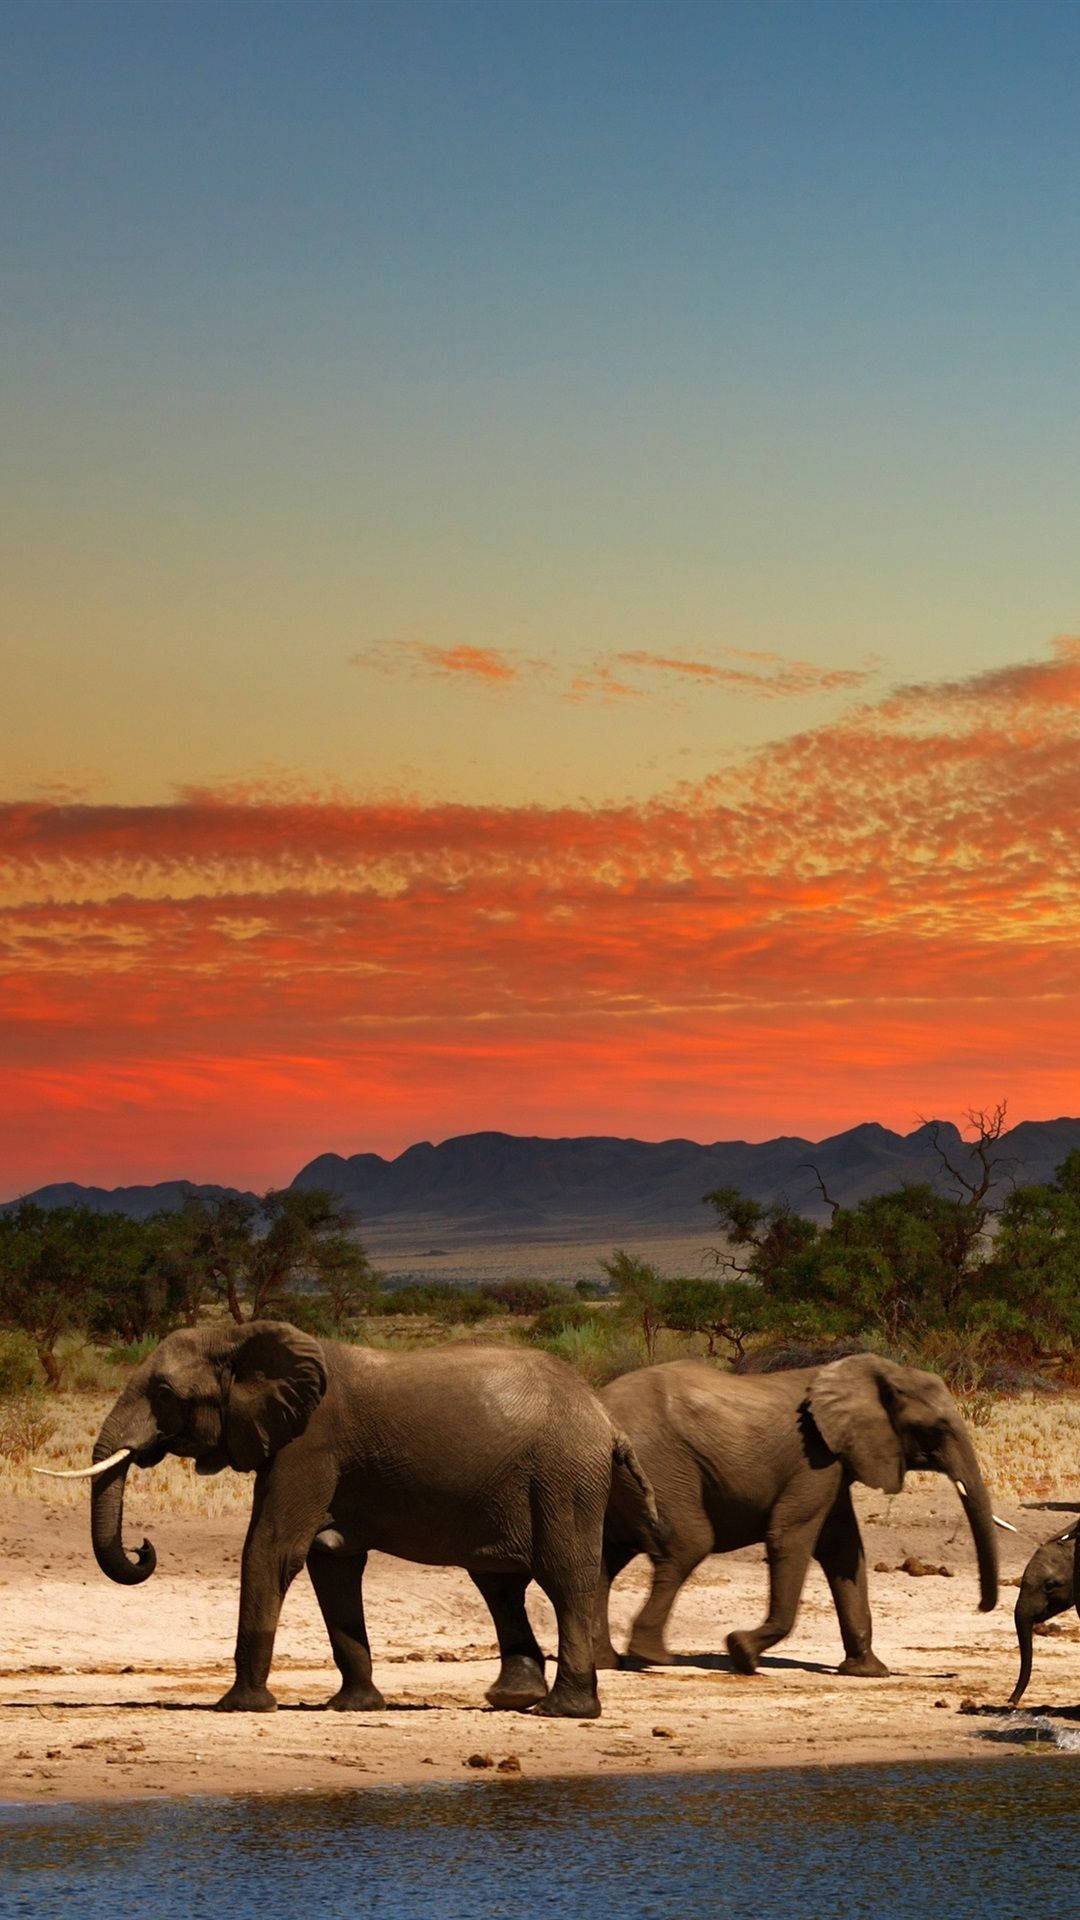 Elephants In Watering Hole Africa Iphone Background